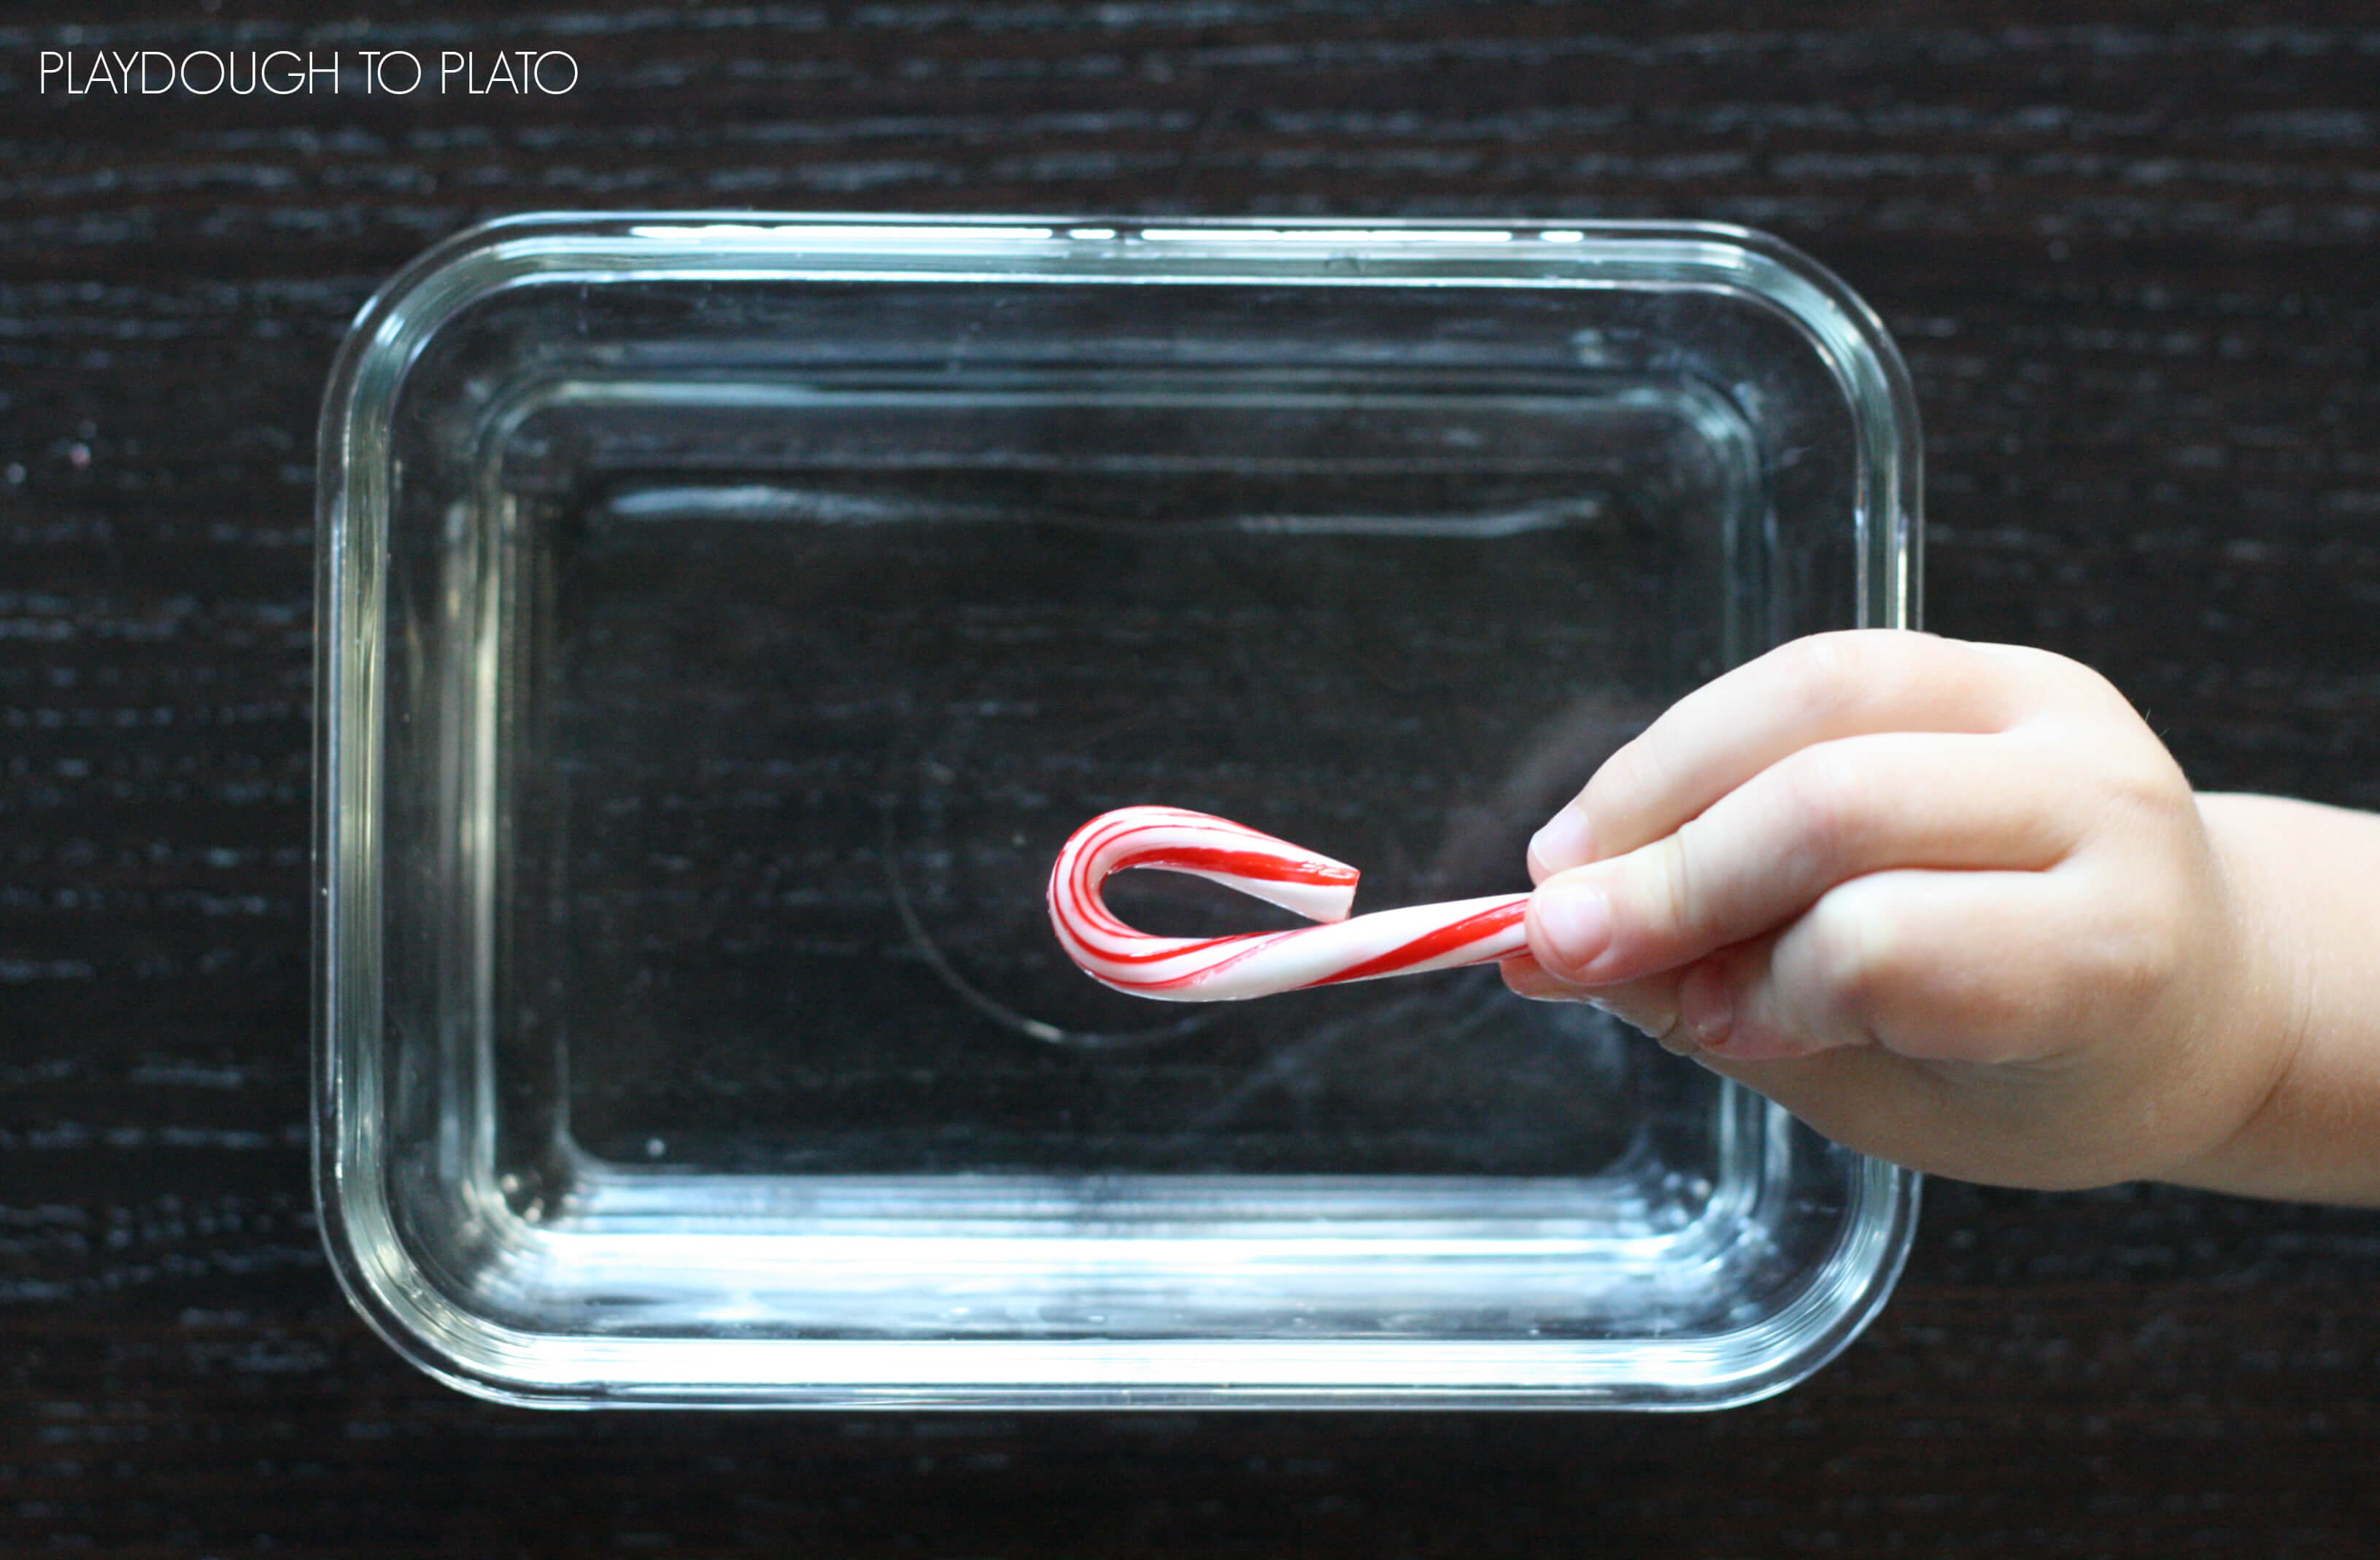 I love this kids science experiment. Make candy cane stripes disappear!